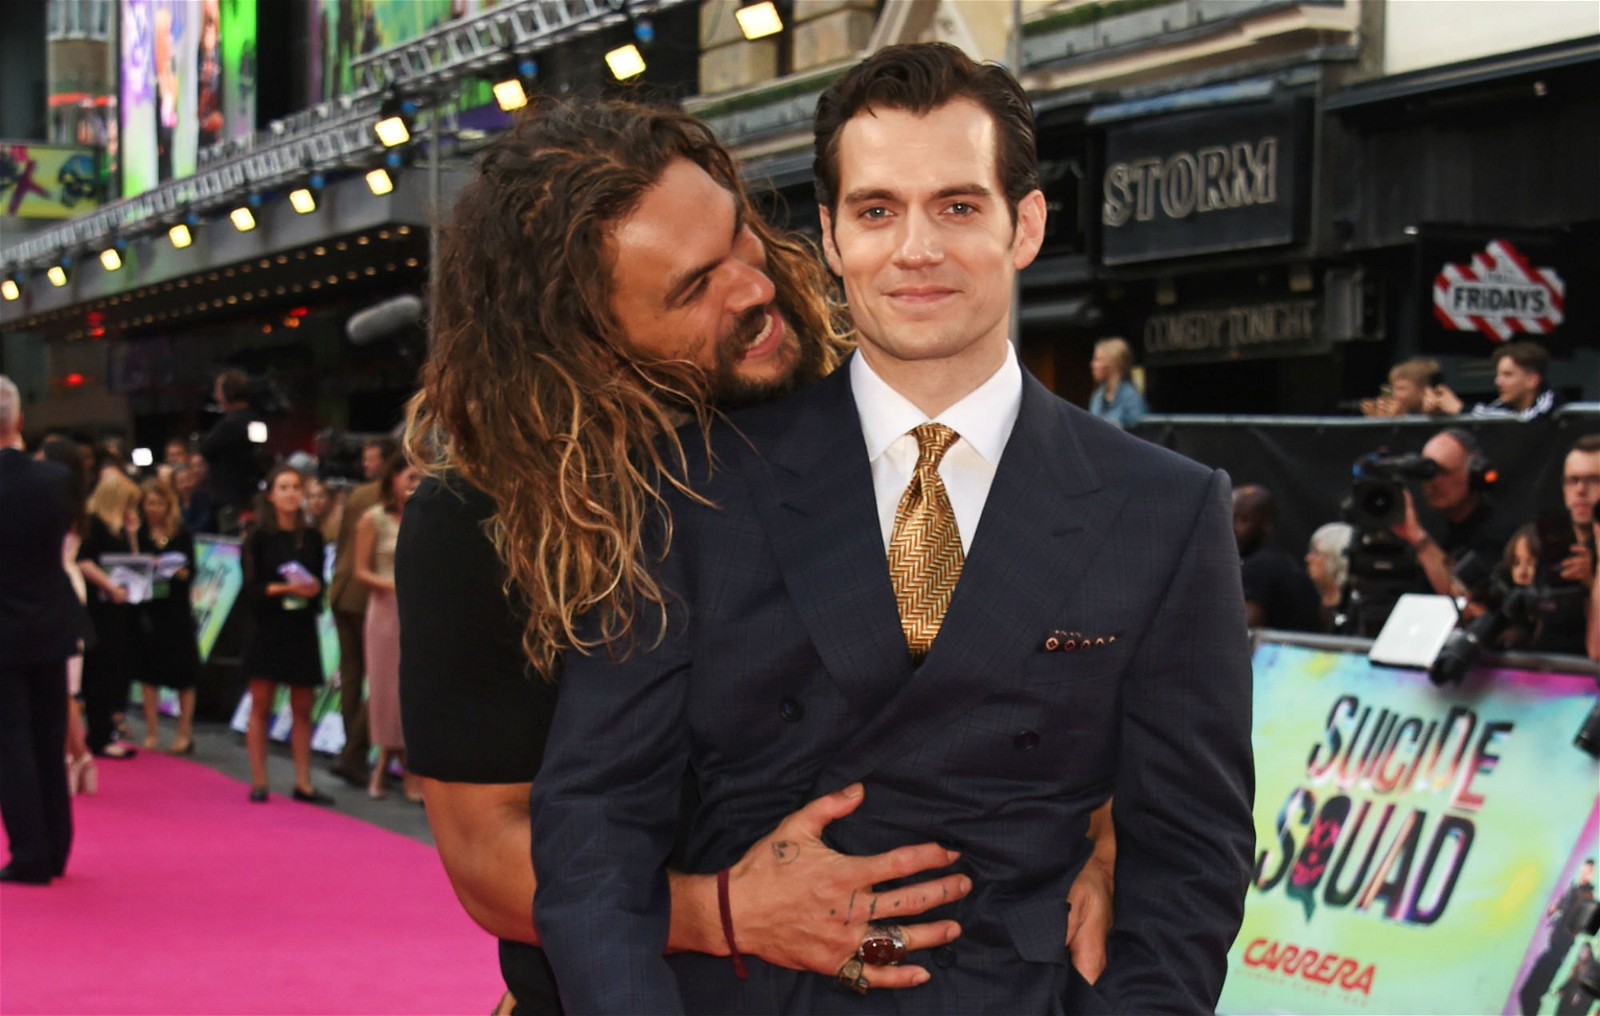 Jason Momoa and Henry Cavill at the London Suicide Squad premiere